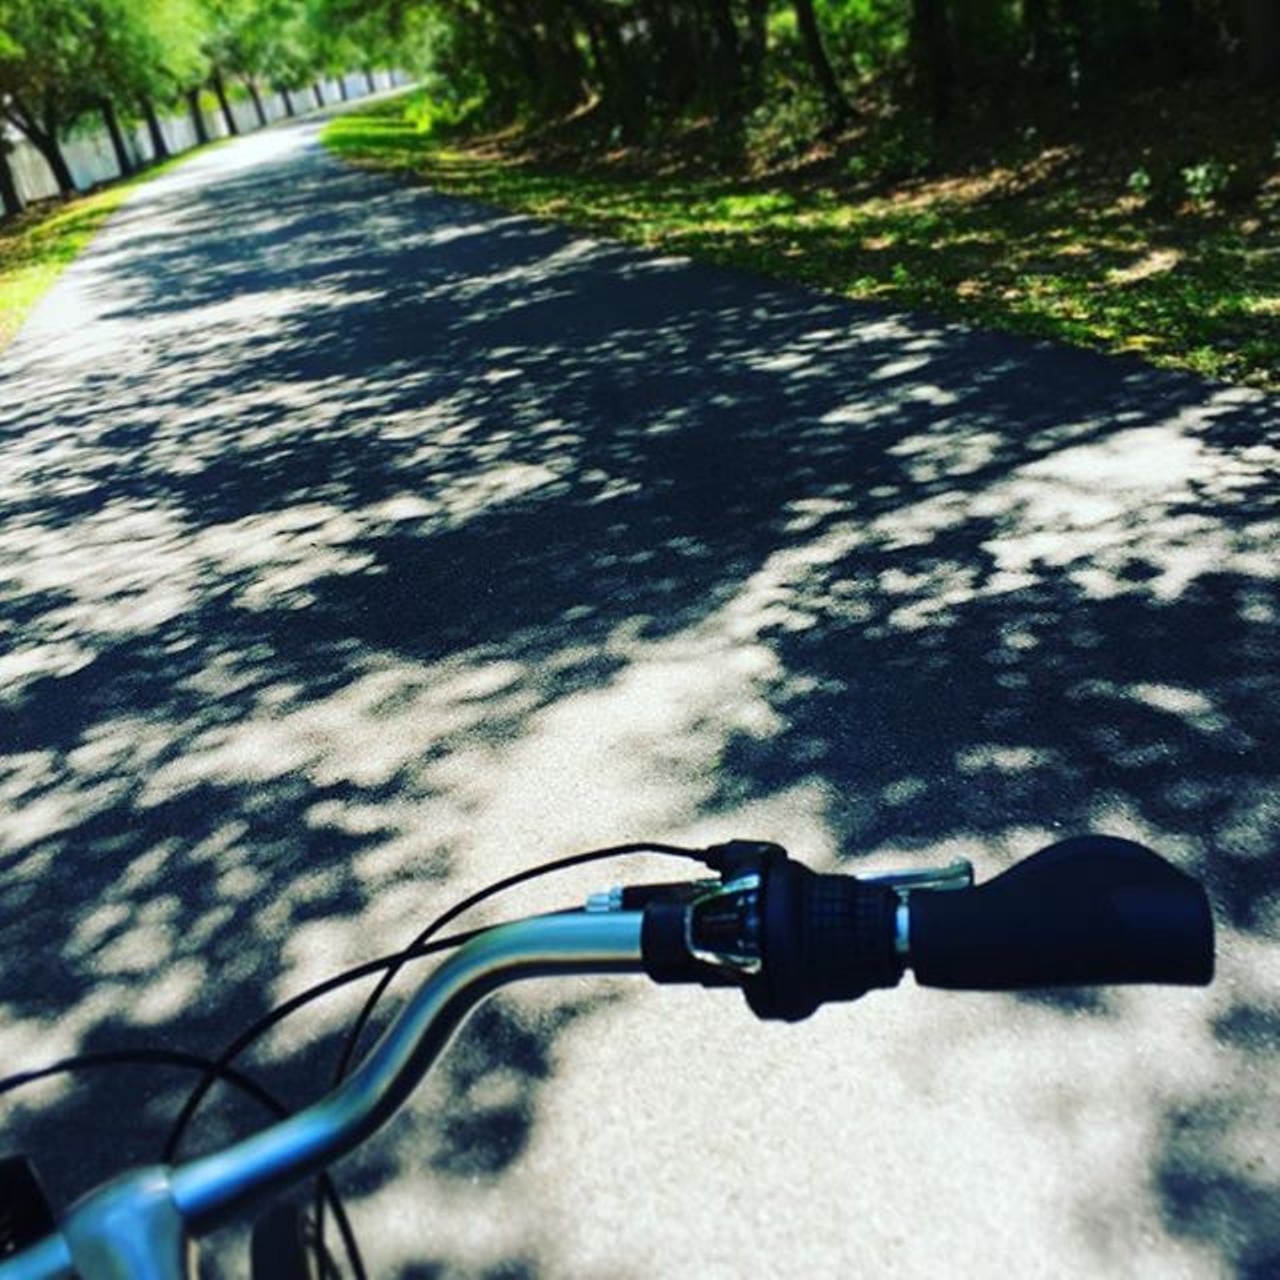 West Orange Trail
Photo via /Instagram 
Over twenty miles of paved trail travels through  Killarney and Oakland, Winter Garden and downtown Apopka. When riding through the town of Tildenville, there&#146;s a butterfly garden in the Tildenville outpost. Bike rentals are available at the Killarney Station in Oakland and the Winter Garden Station.
Photo via Janetsbarth/Instagram